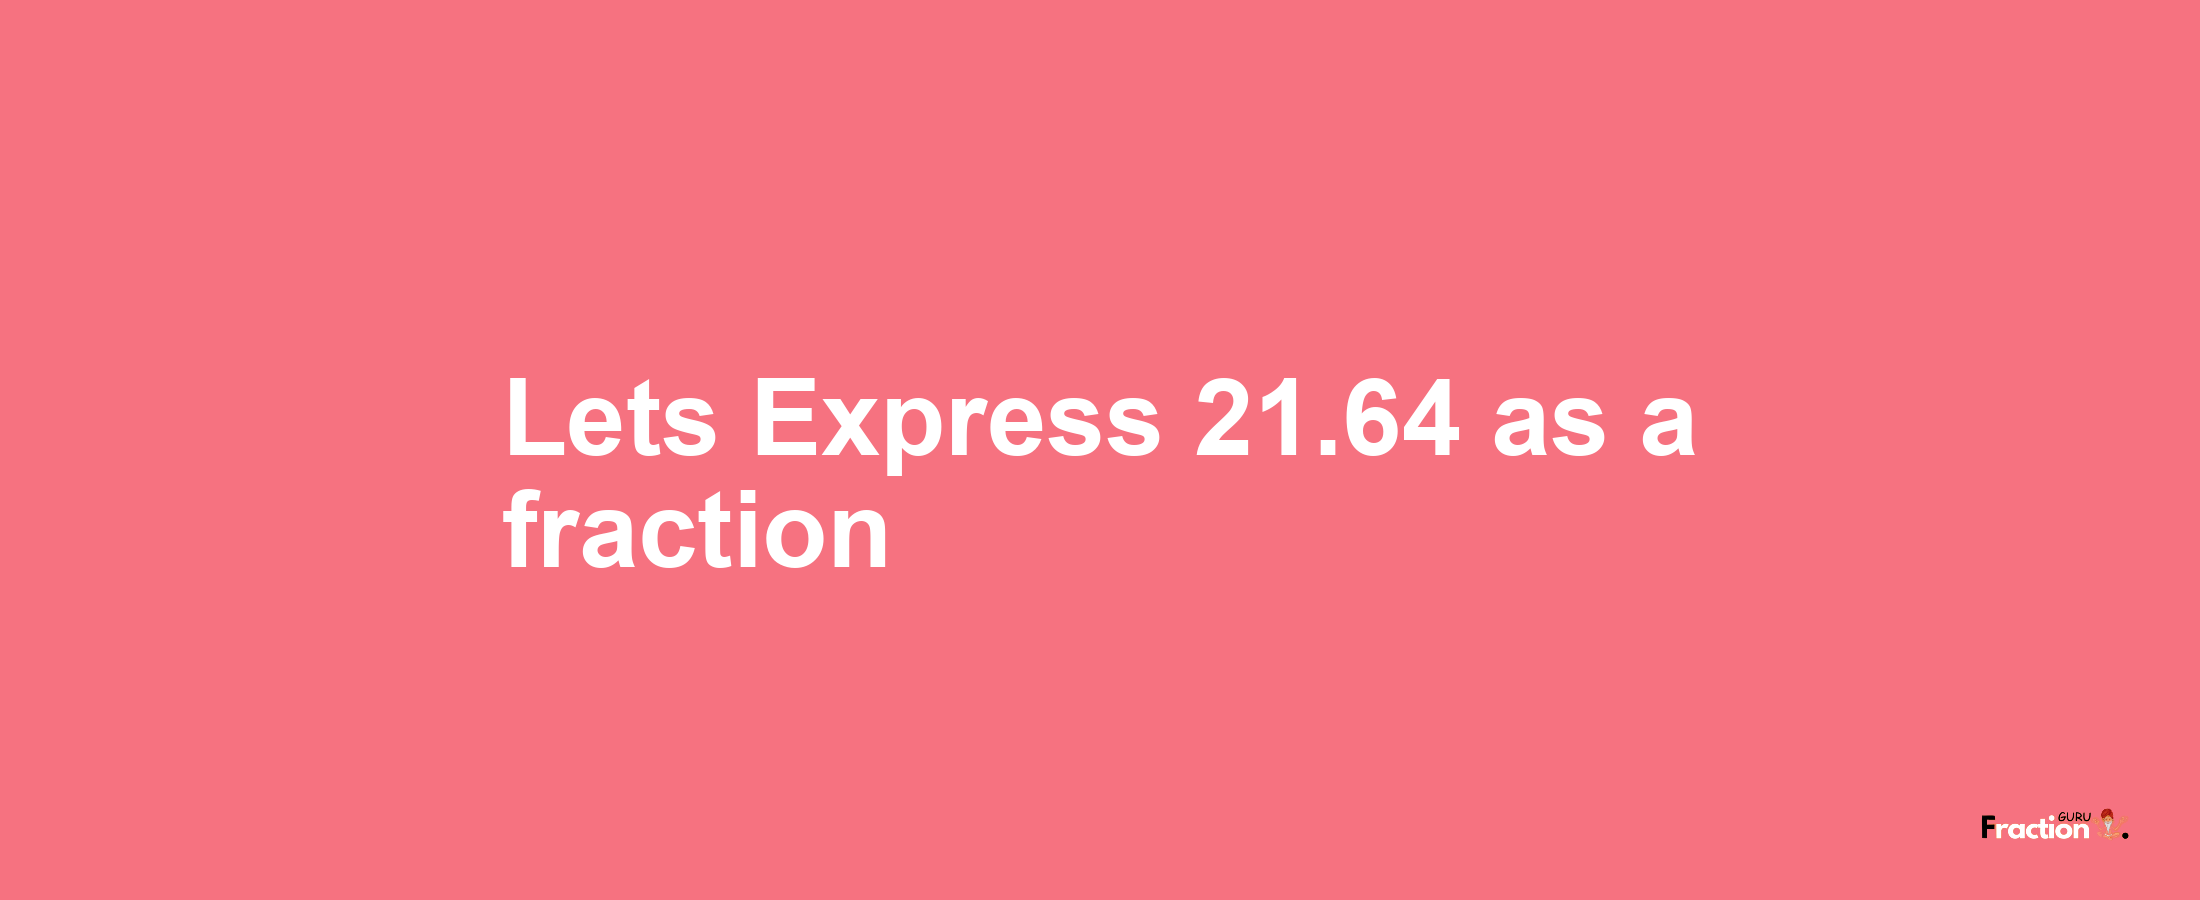 Lets Express 21.64 as afraction